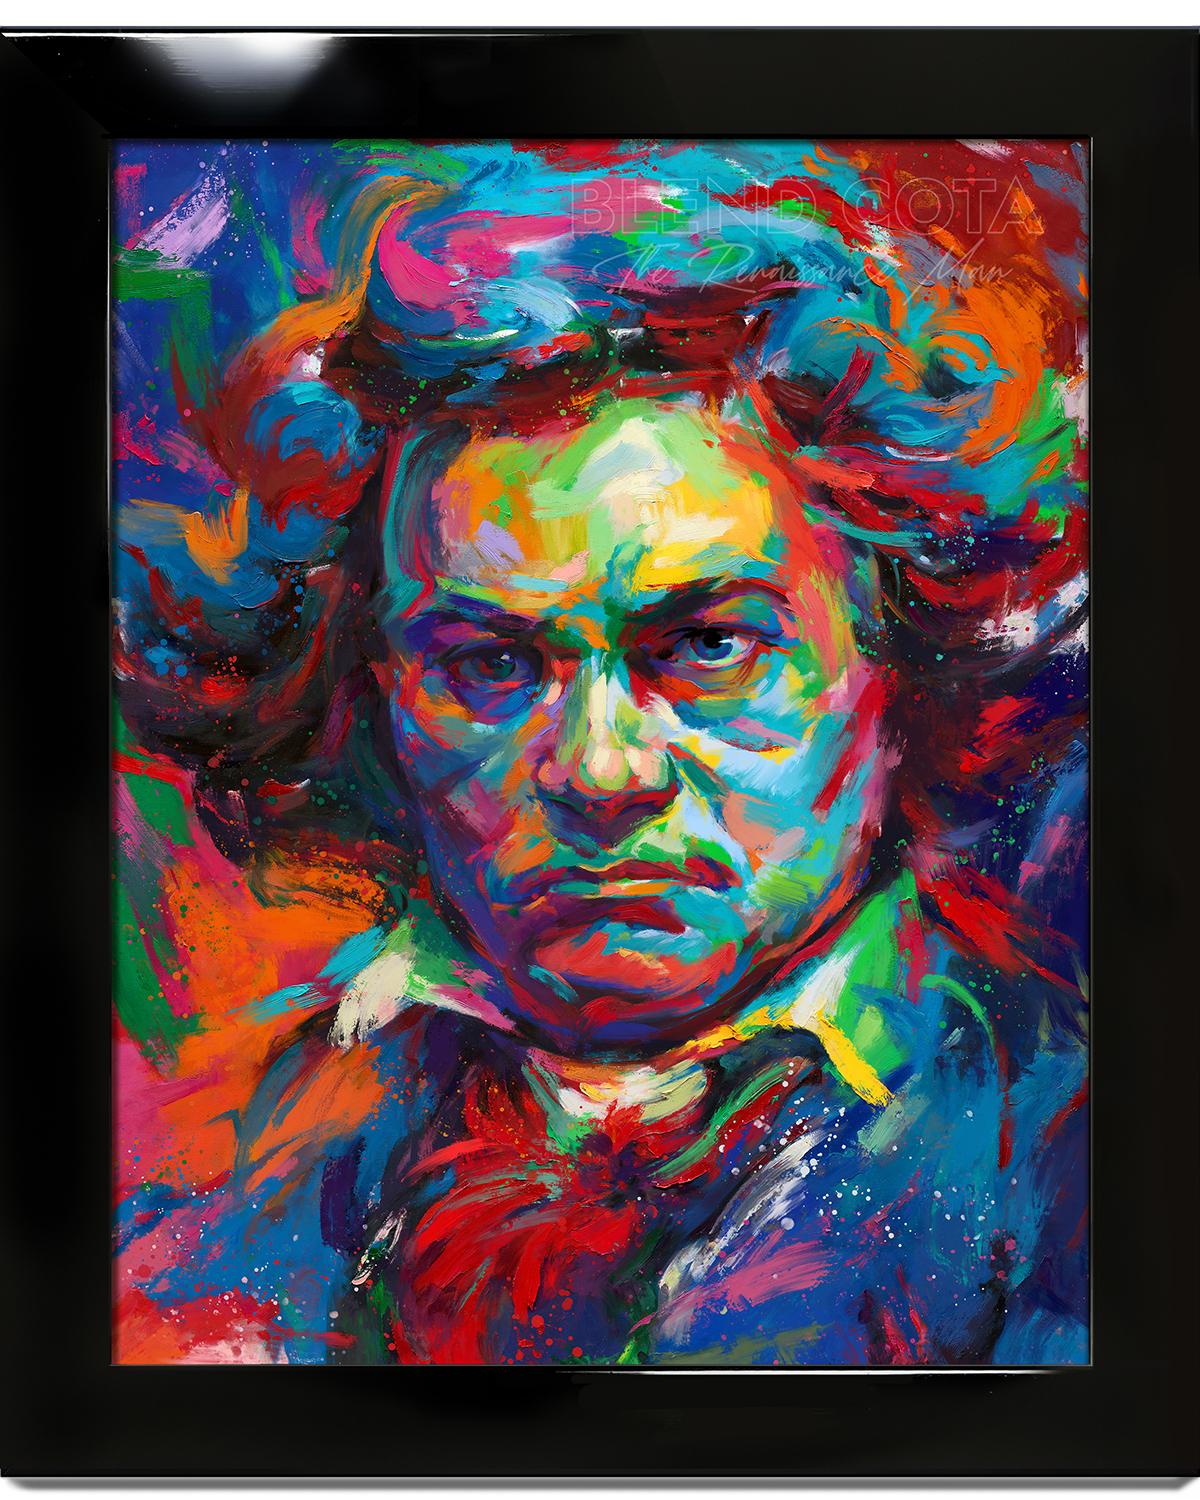 Beethoven - Original oil on canvas painting - Painting by Blend Cota